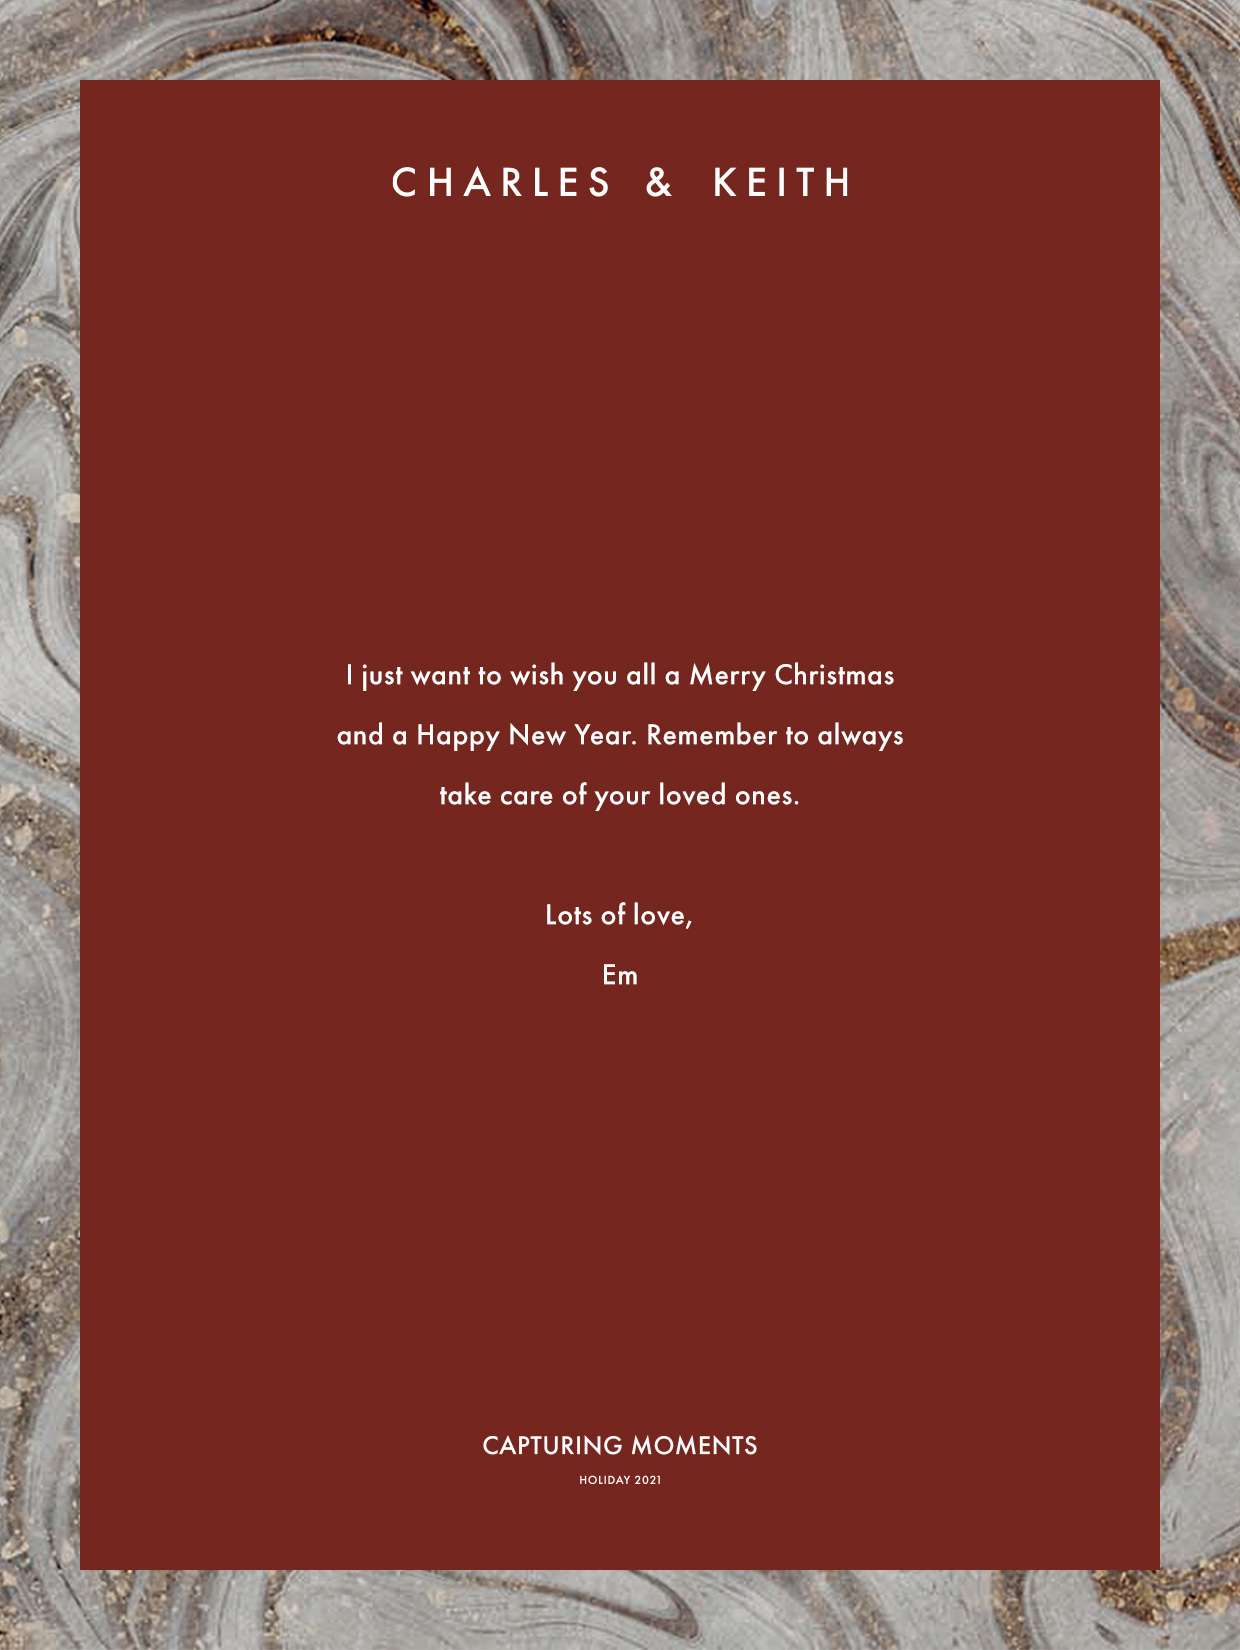 charles keith holiday blog kol wishes 10 content